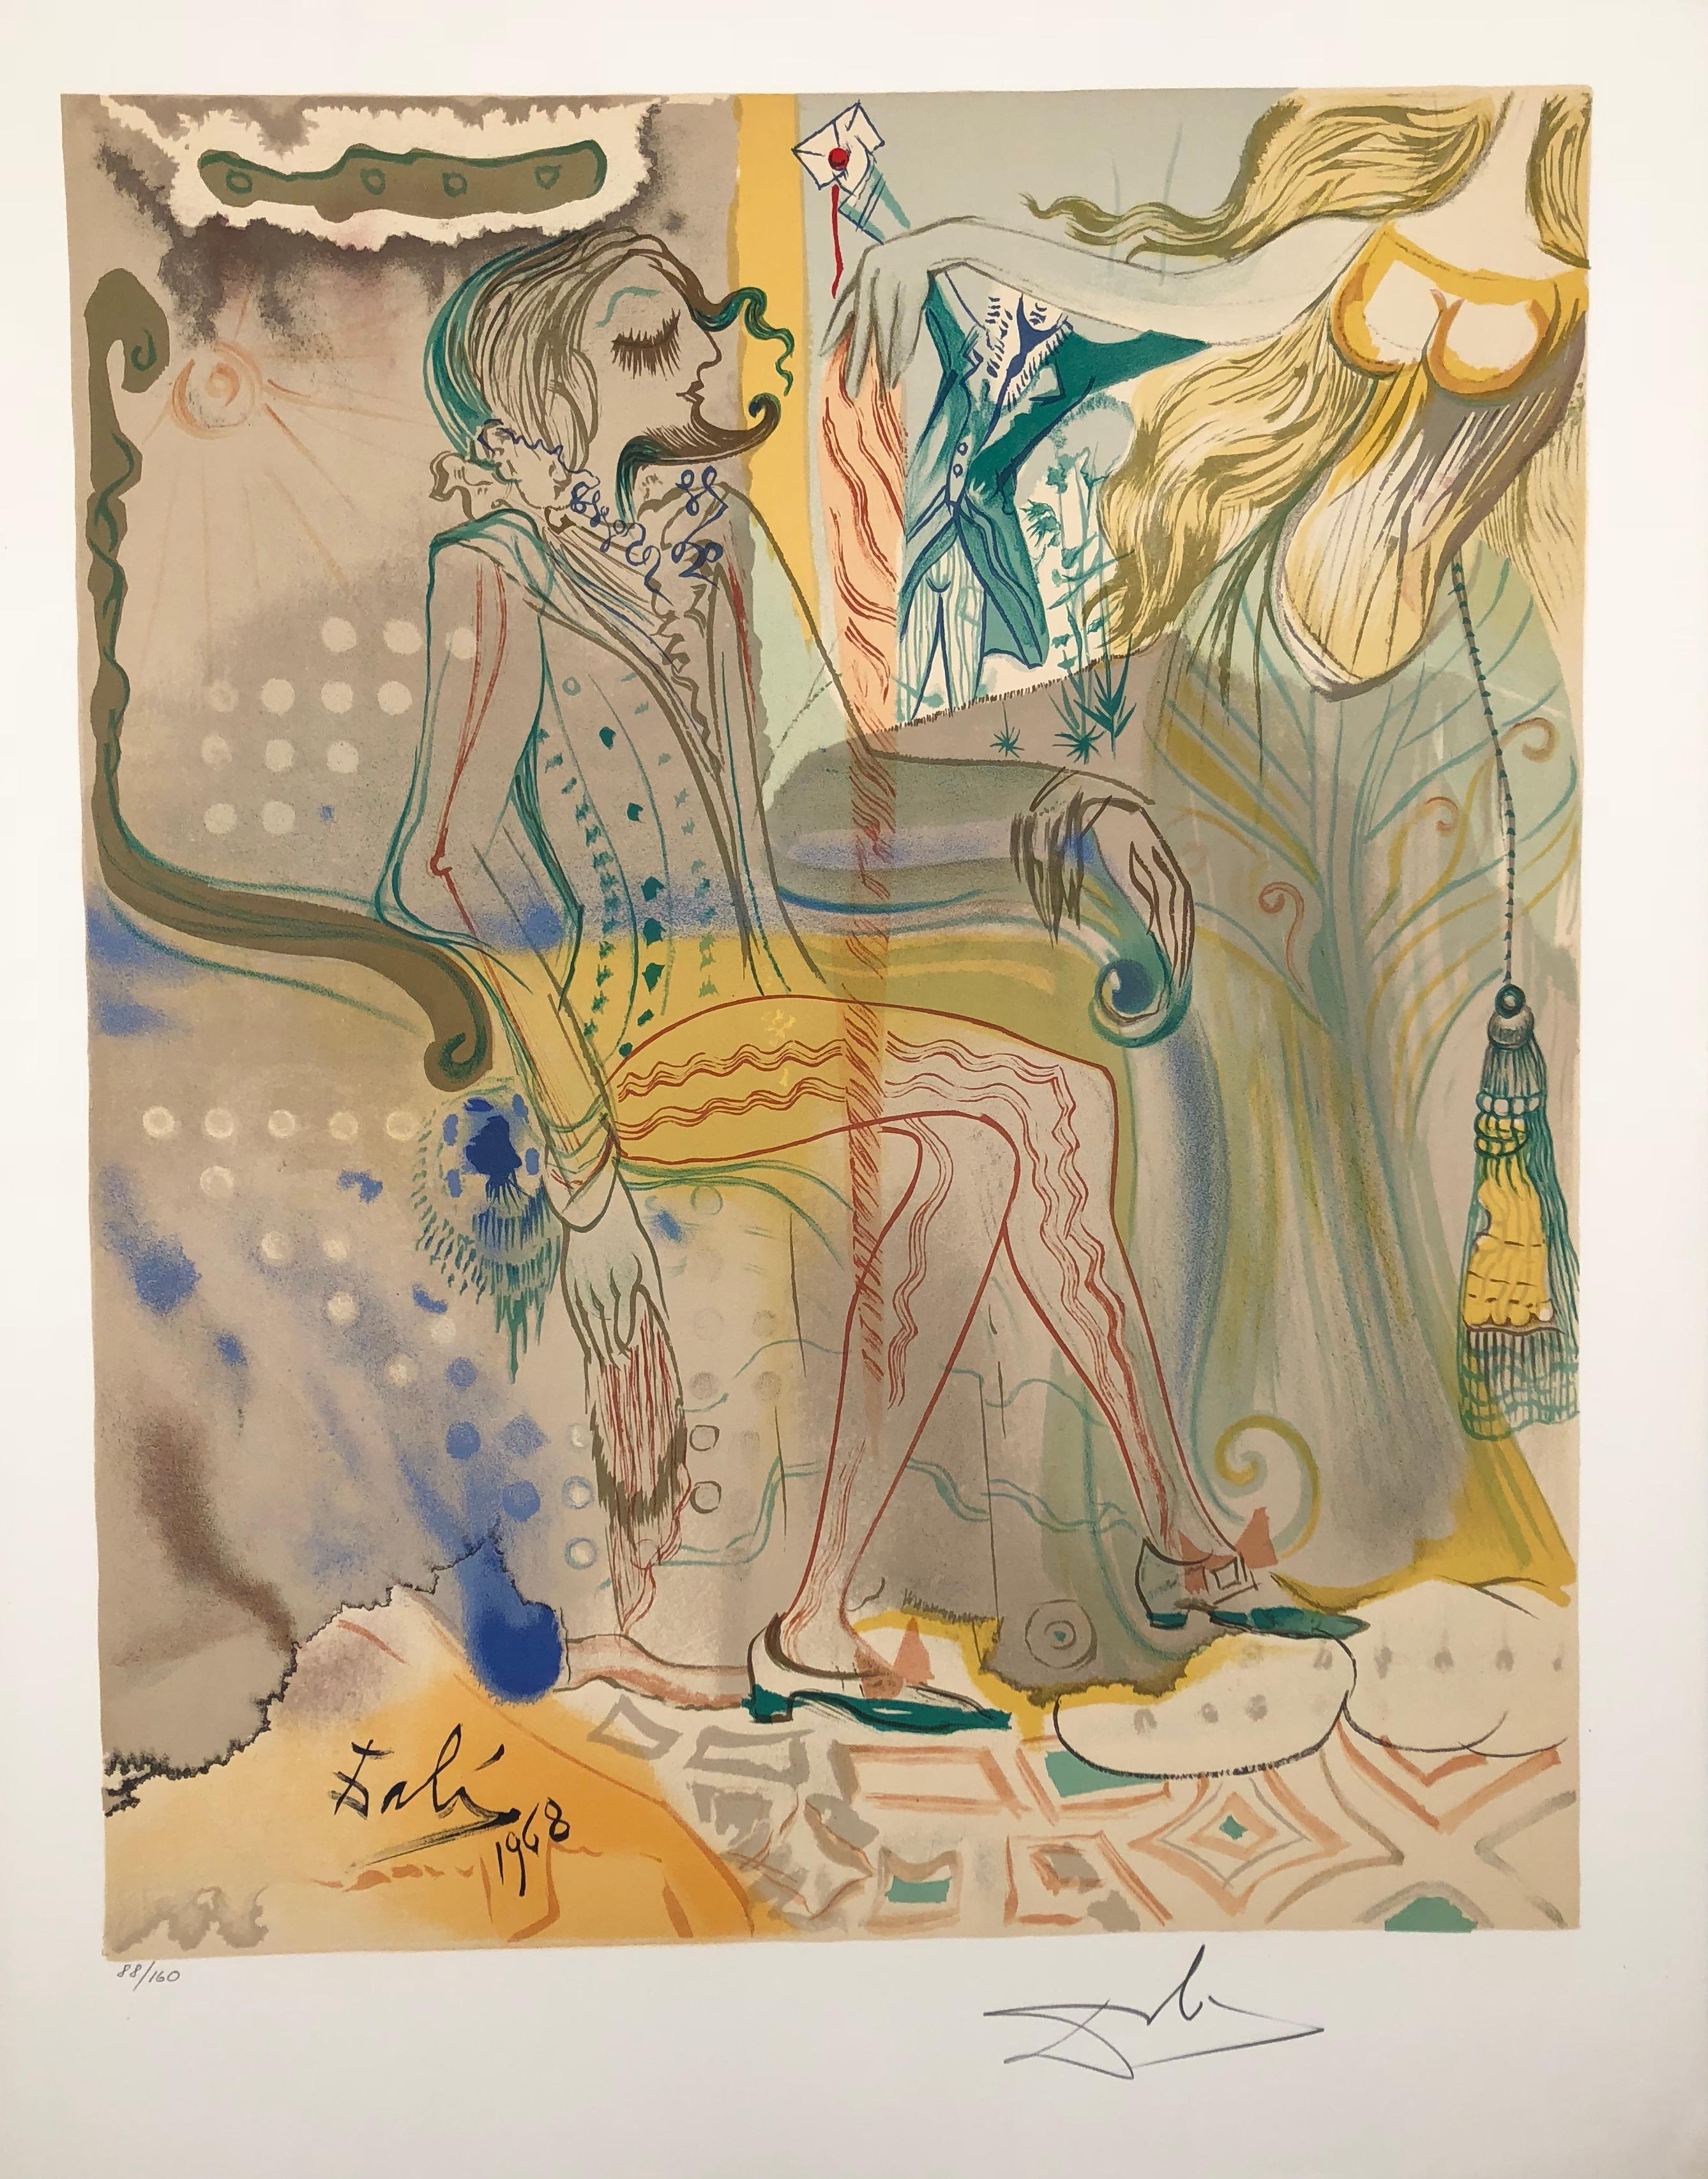 Dumont and Marton - Print by Salvador Dalí